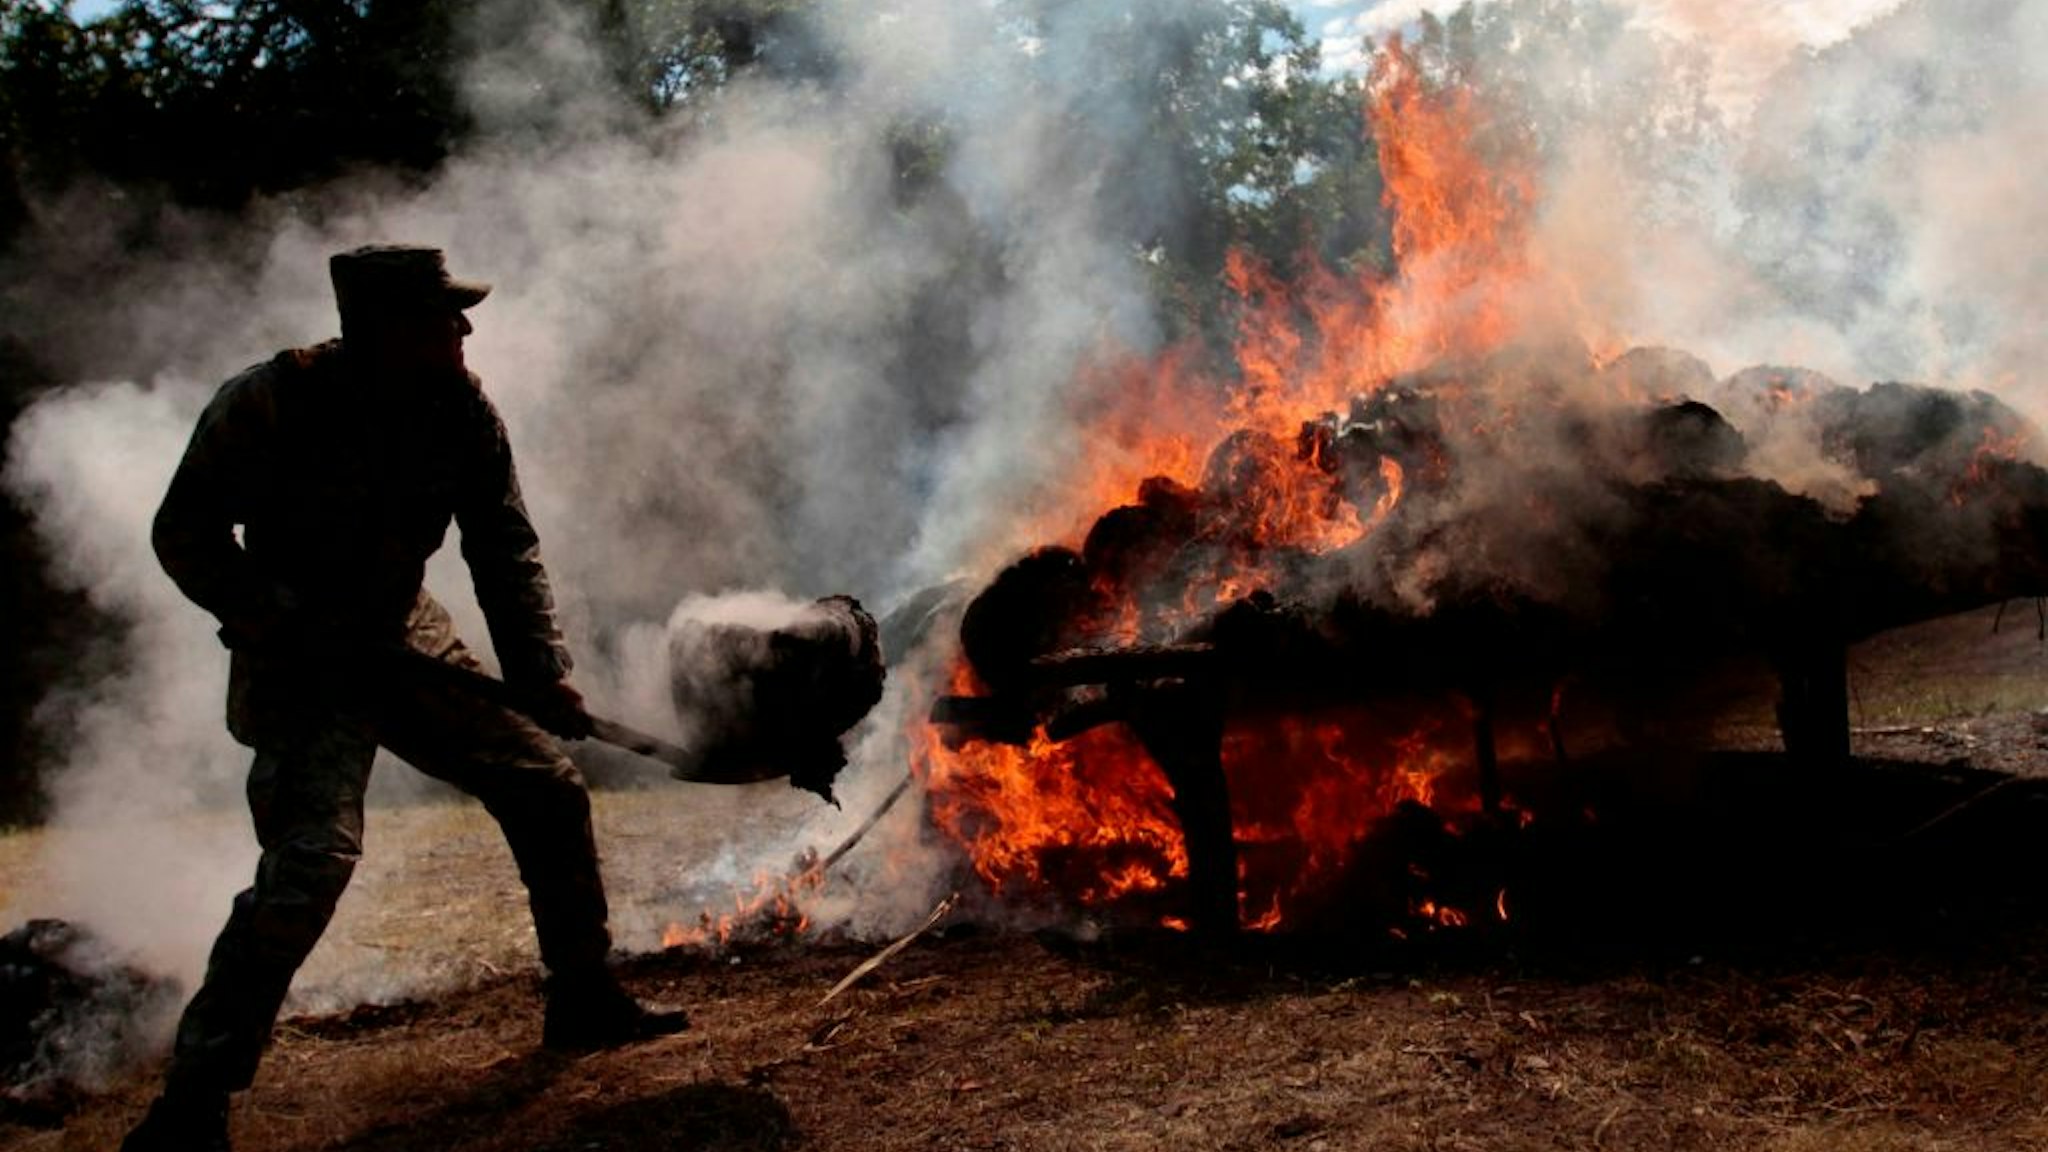 A Mexican Army soldier burns about 945 kilograms of marijuana at the headquarters of IX Militar Region in Acapulco, Guererro state, on December 8, 2011. The drug was seized to alleged members of drugs cartels who operate in the touristic port city of Acapulco. AFP PHOTO/Pedro PARDO (Photo by Pedro PARDO / AFP) (Photo by PEDRO PARDO/AFP via Getty Images)